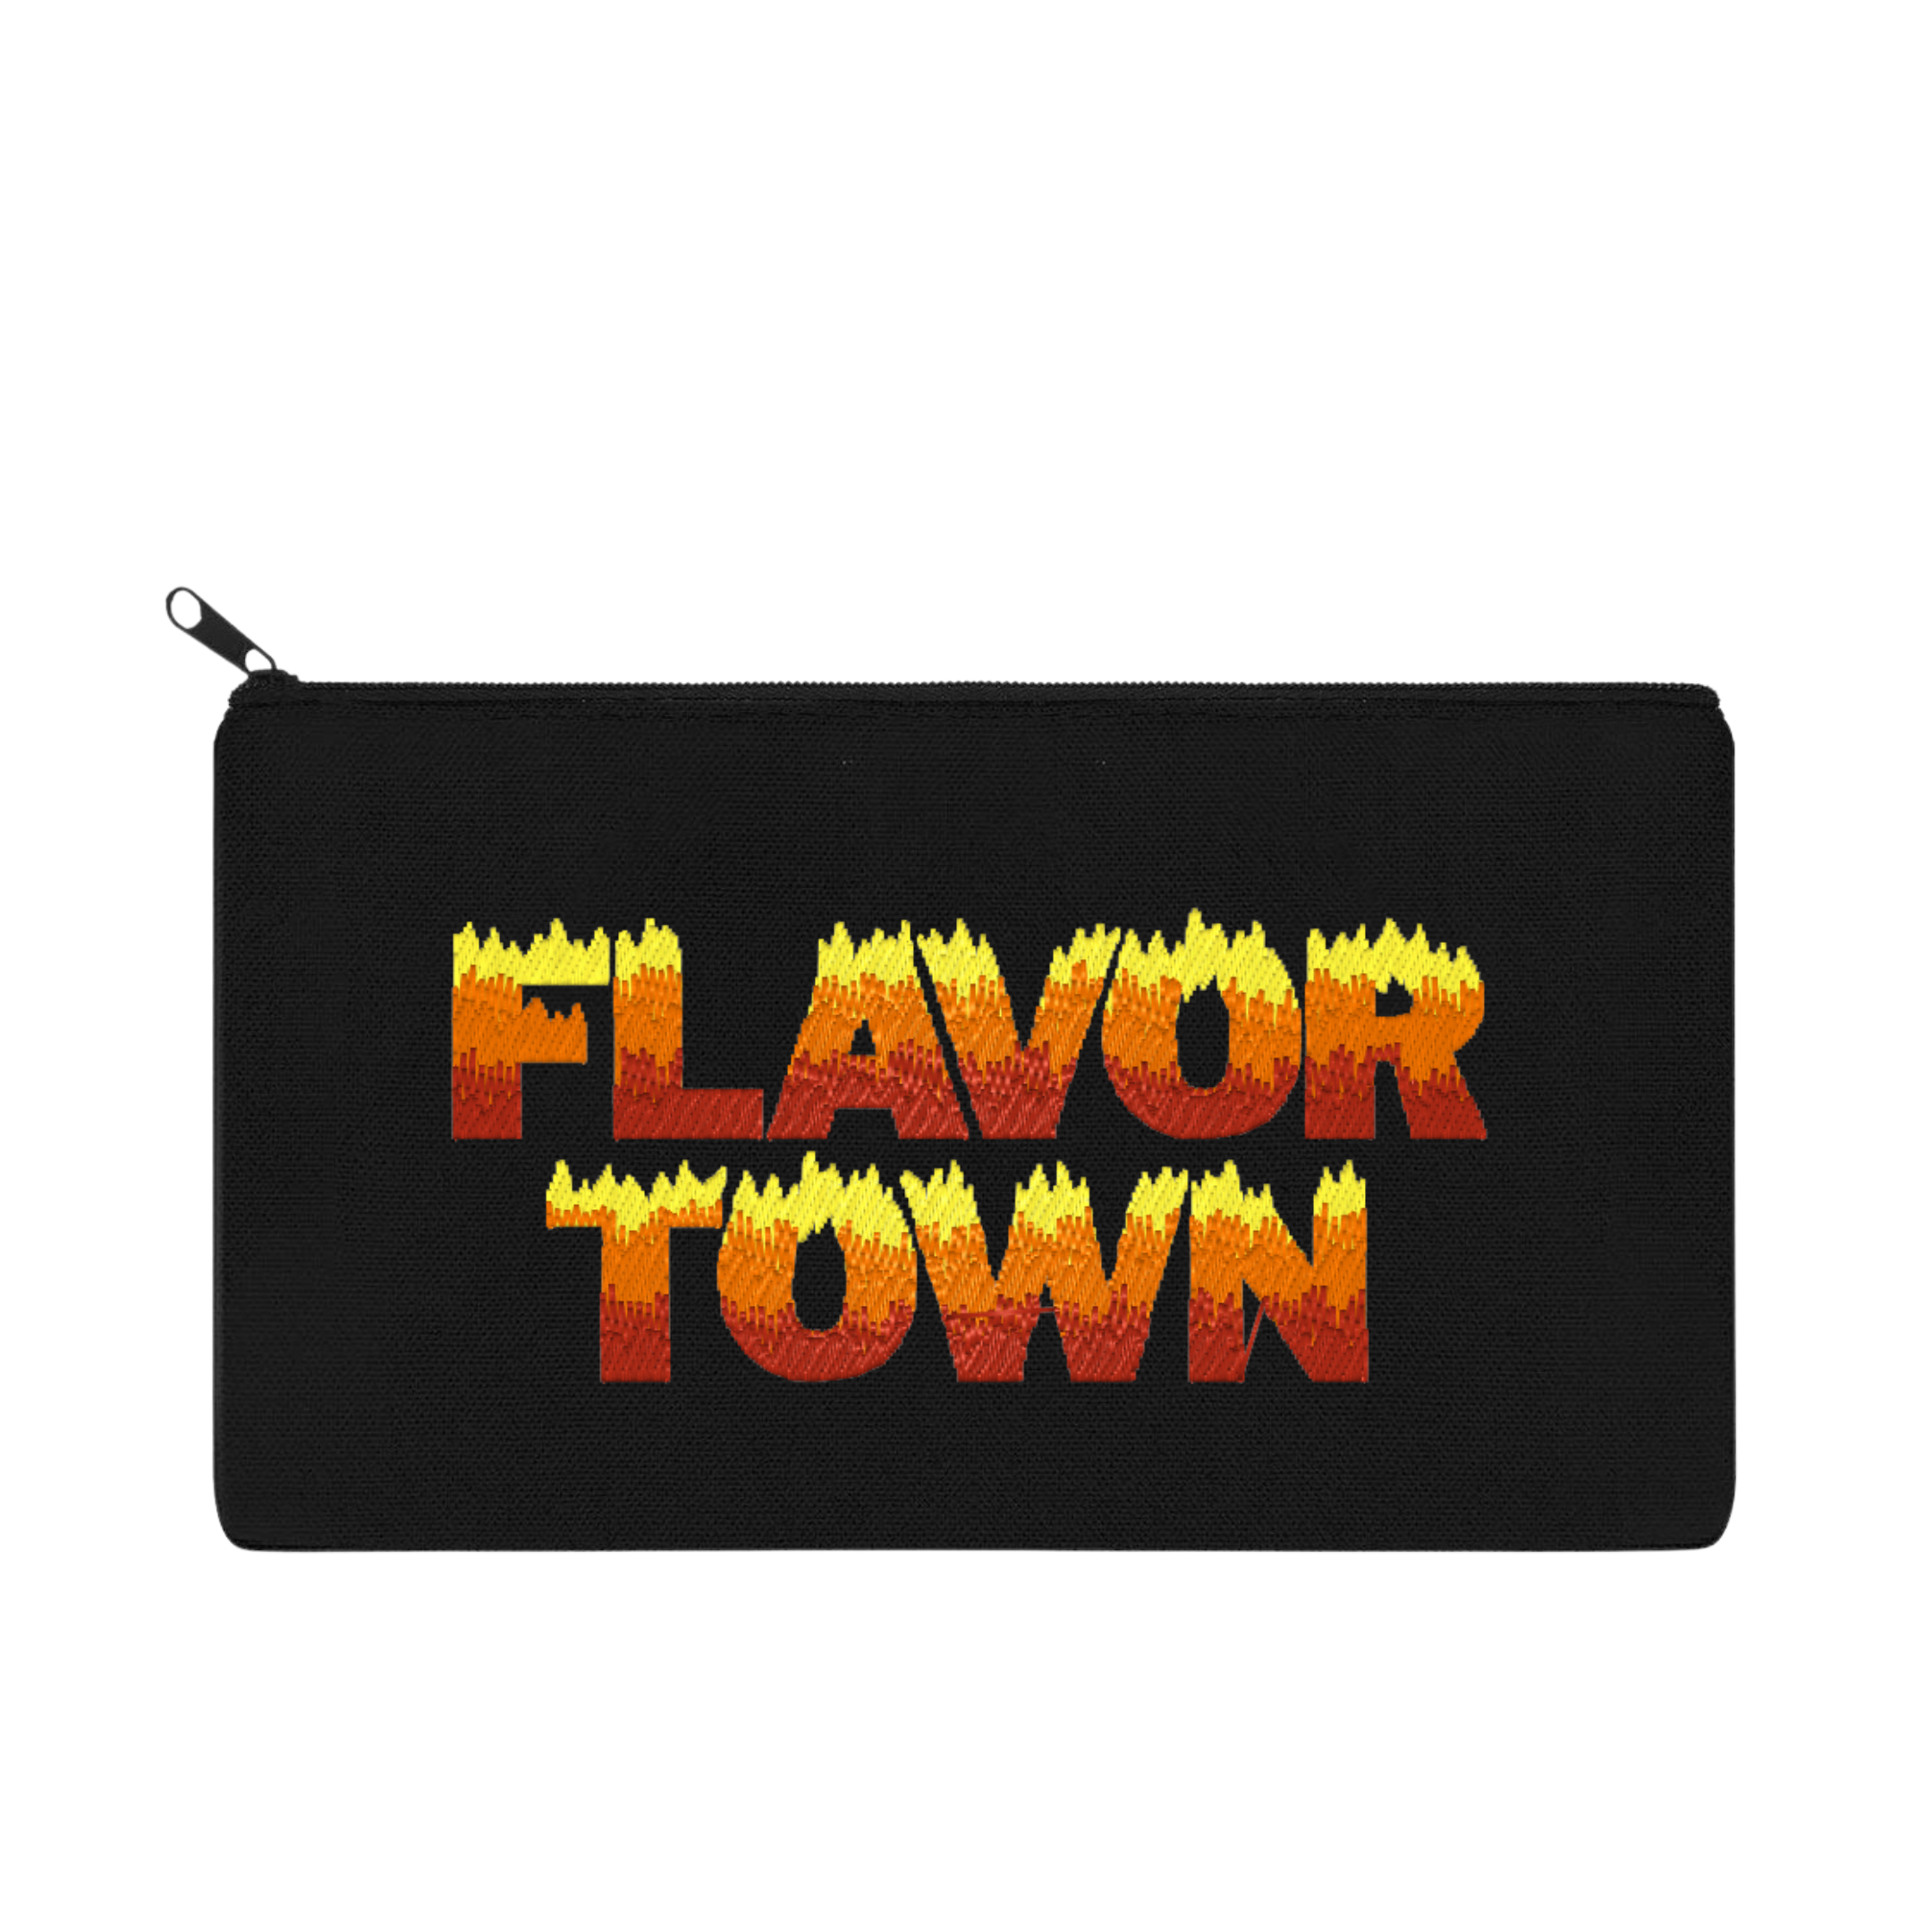 FLAVOR TOWN Flame Font Embroidered Multipurpose Zipper Pouch Bag